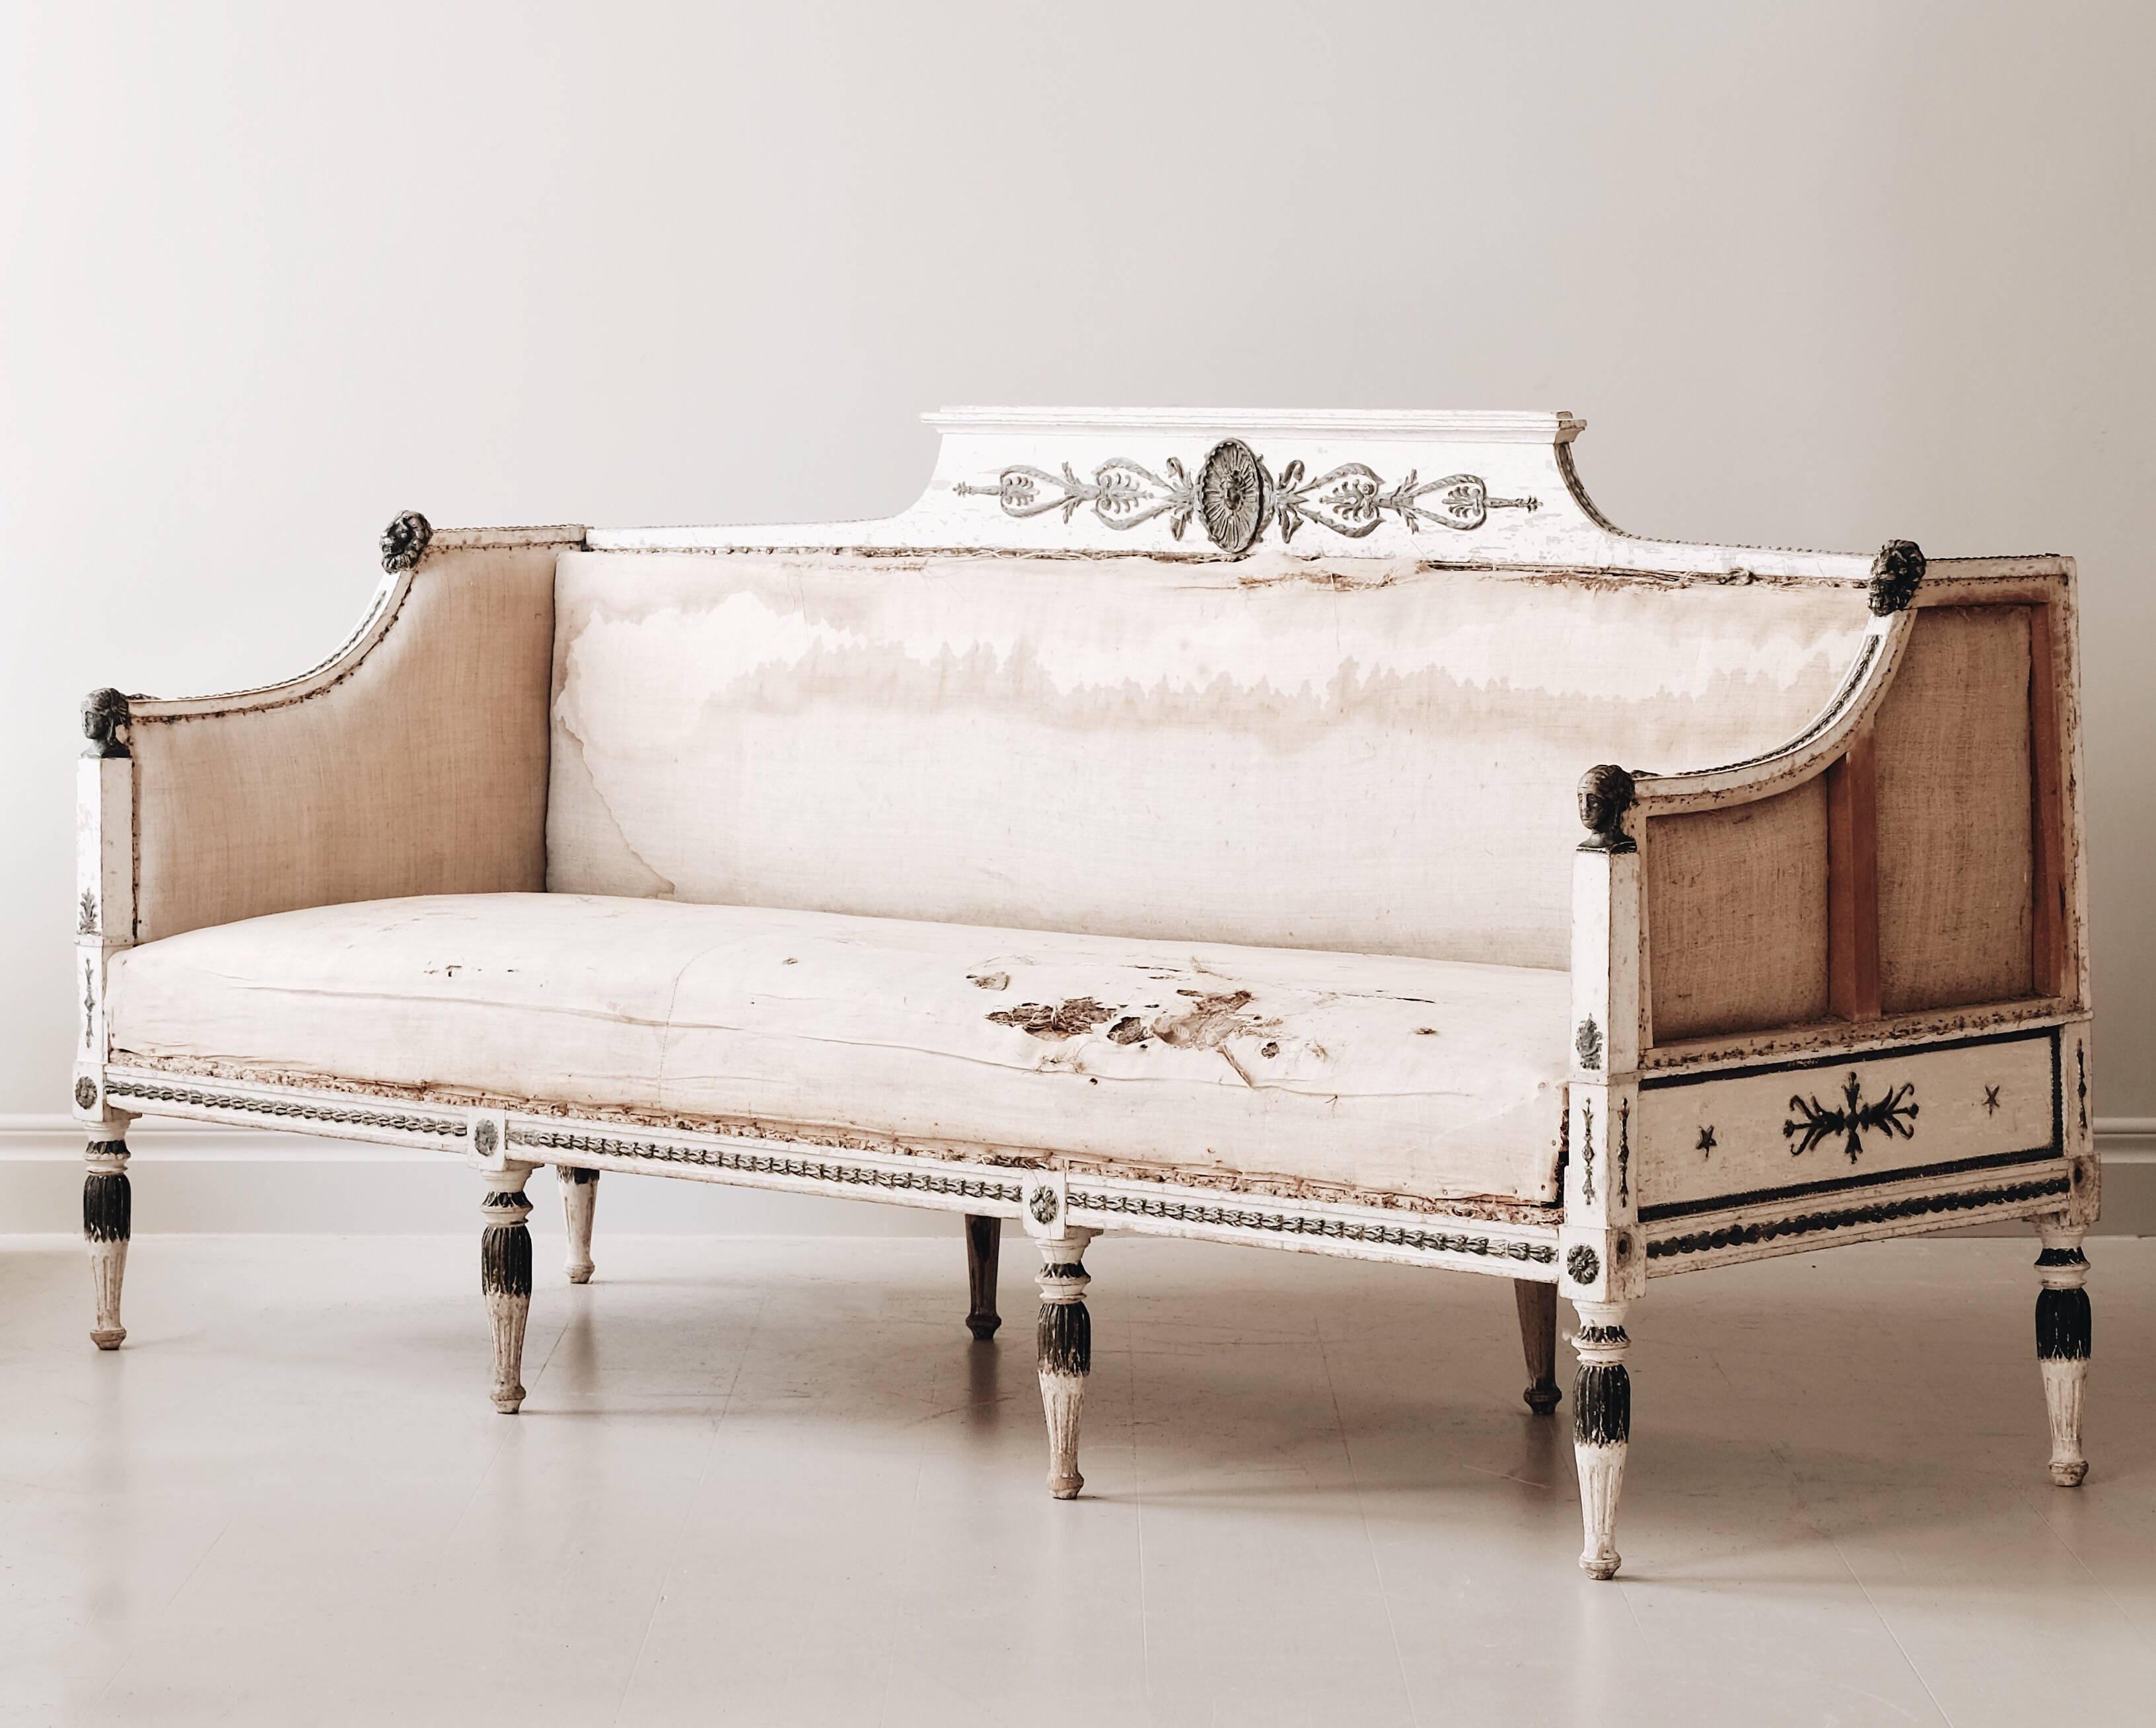 Fine 19th century late Gustavian sofa inspired by the Roman Empire and ancient Egypt. The sofa has its original padding left and is in original color with faux oxidized copper painted to the carvings, lion heads and female heads on the armrests.